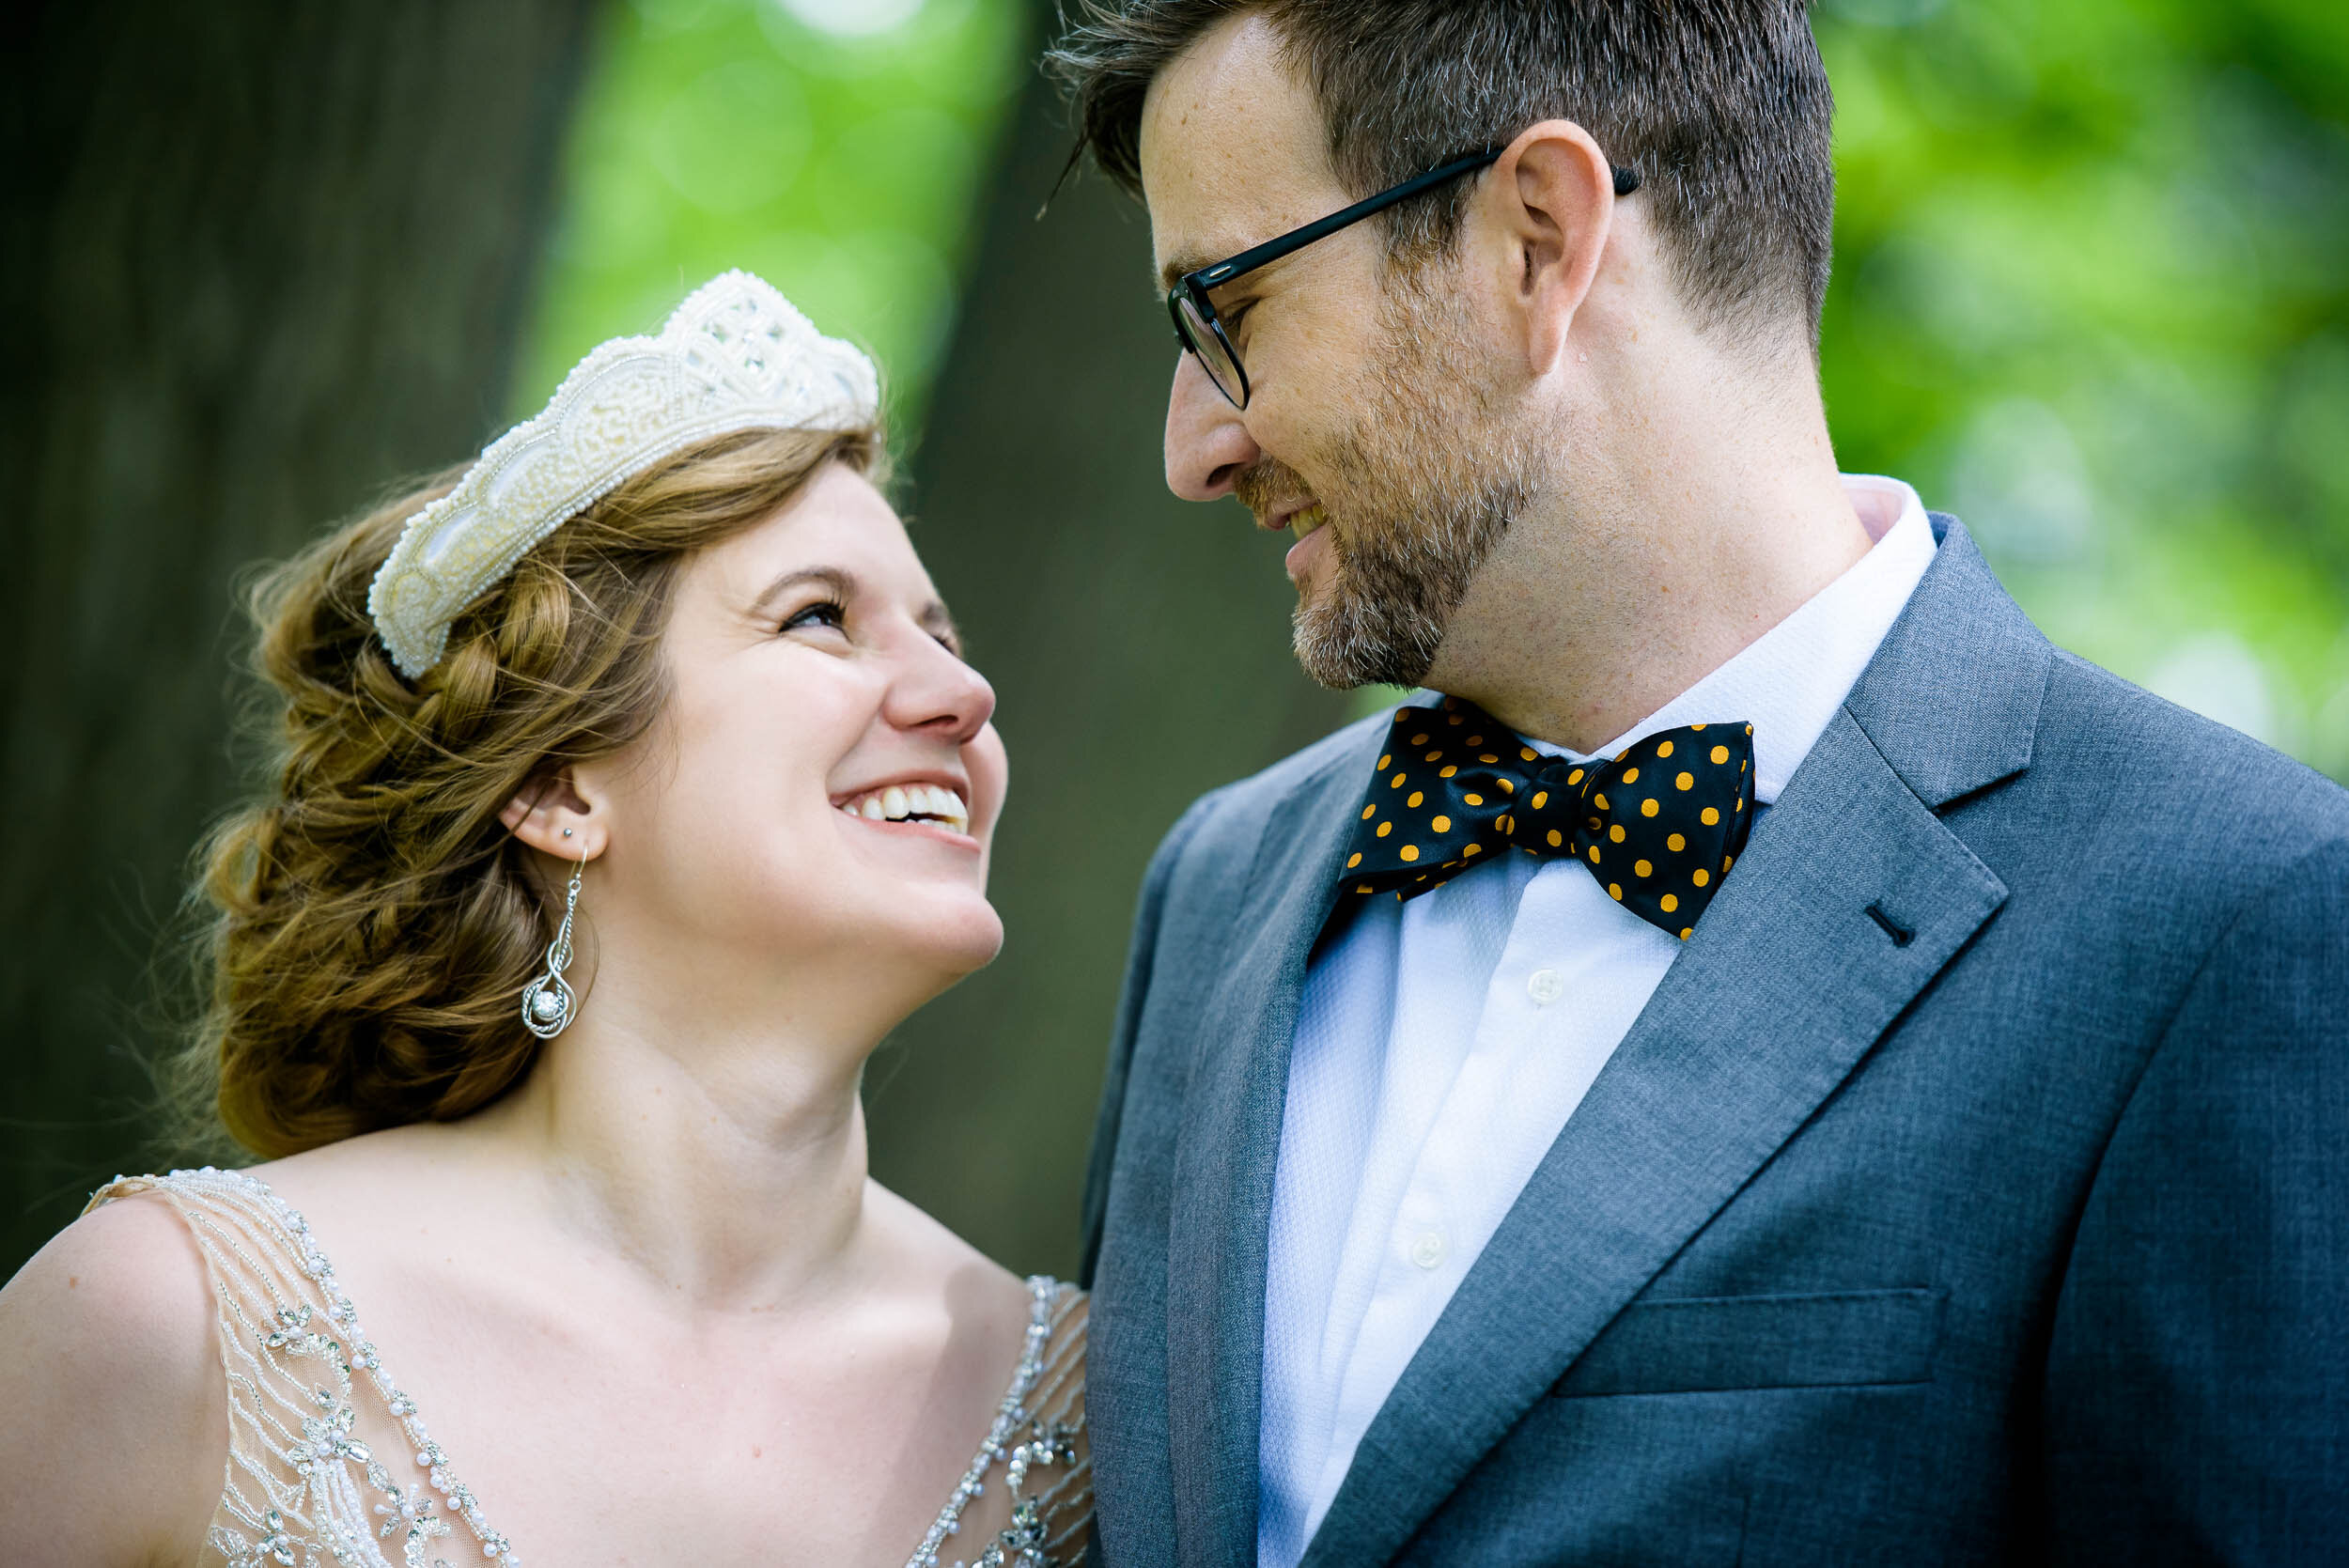 Bride and groom outdoor wedding portrait: Columbus Park Refectory Chicago wedding captured by J. Brown Photography.